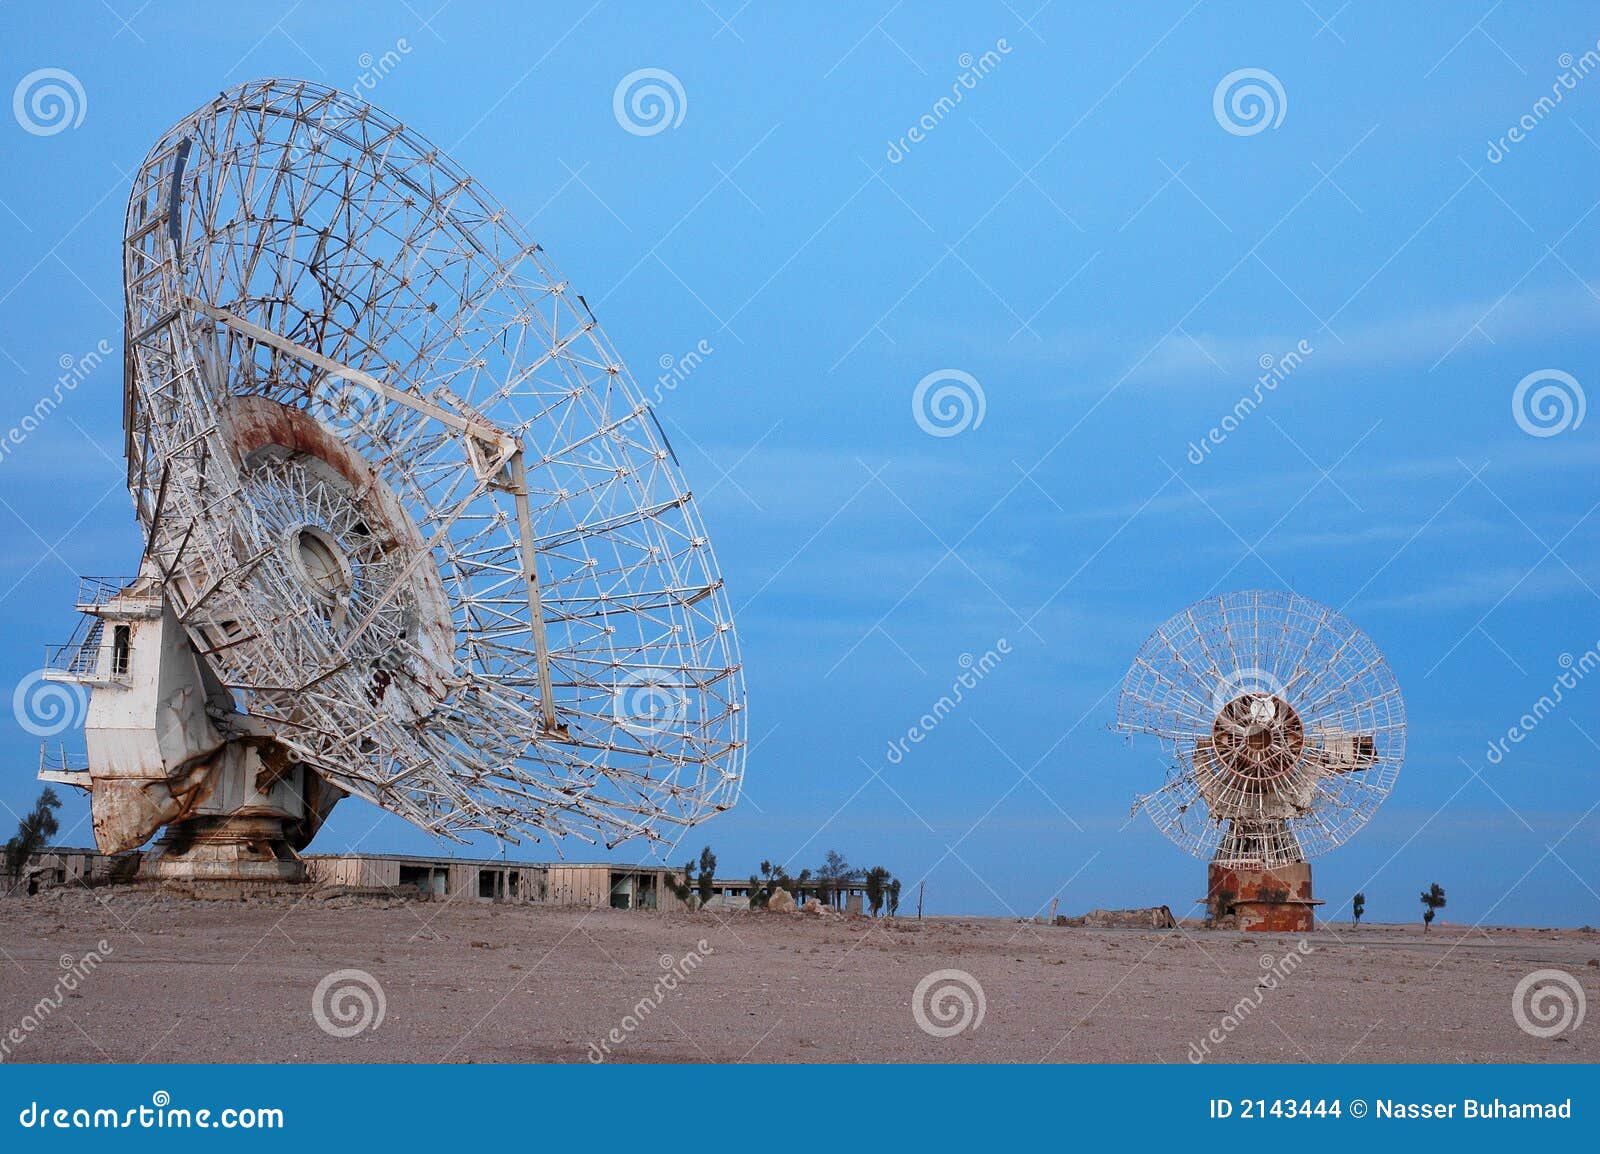 tow satalite dish in blue sky